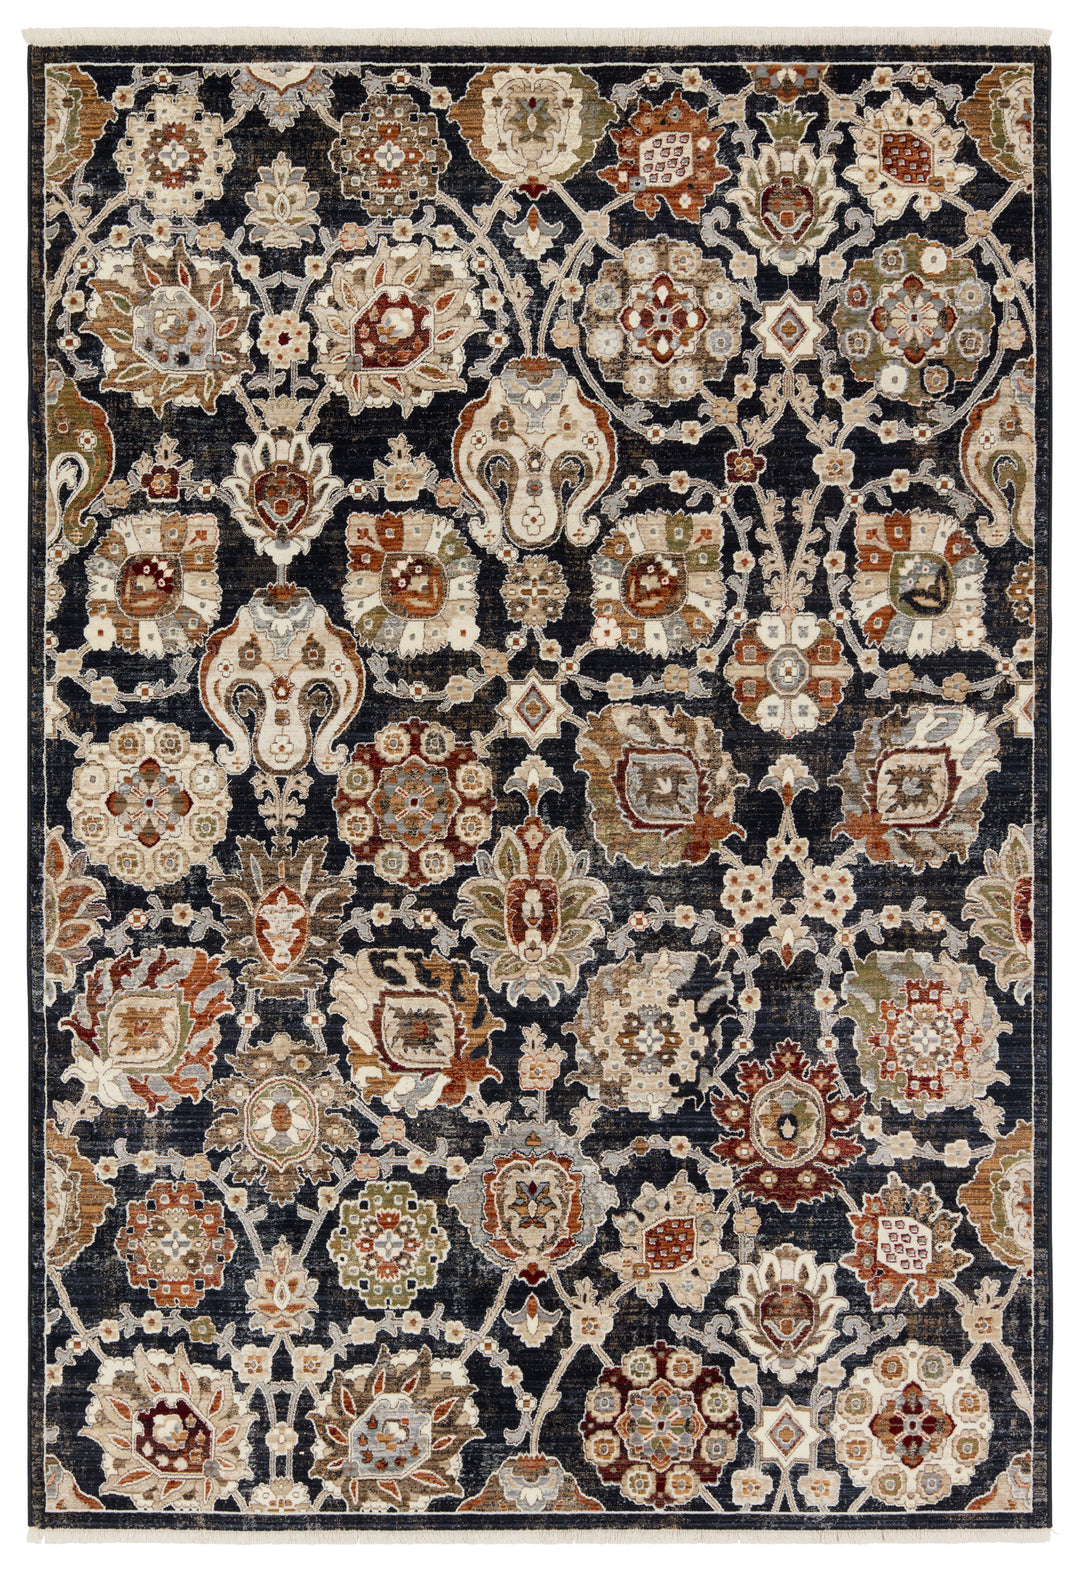 Vibe by Jaipur Living Althea Floral Blue/ Cream Area Rug (ZEFIRA - ZFA21)